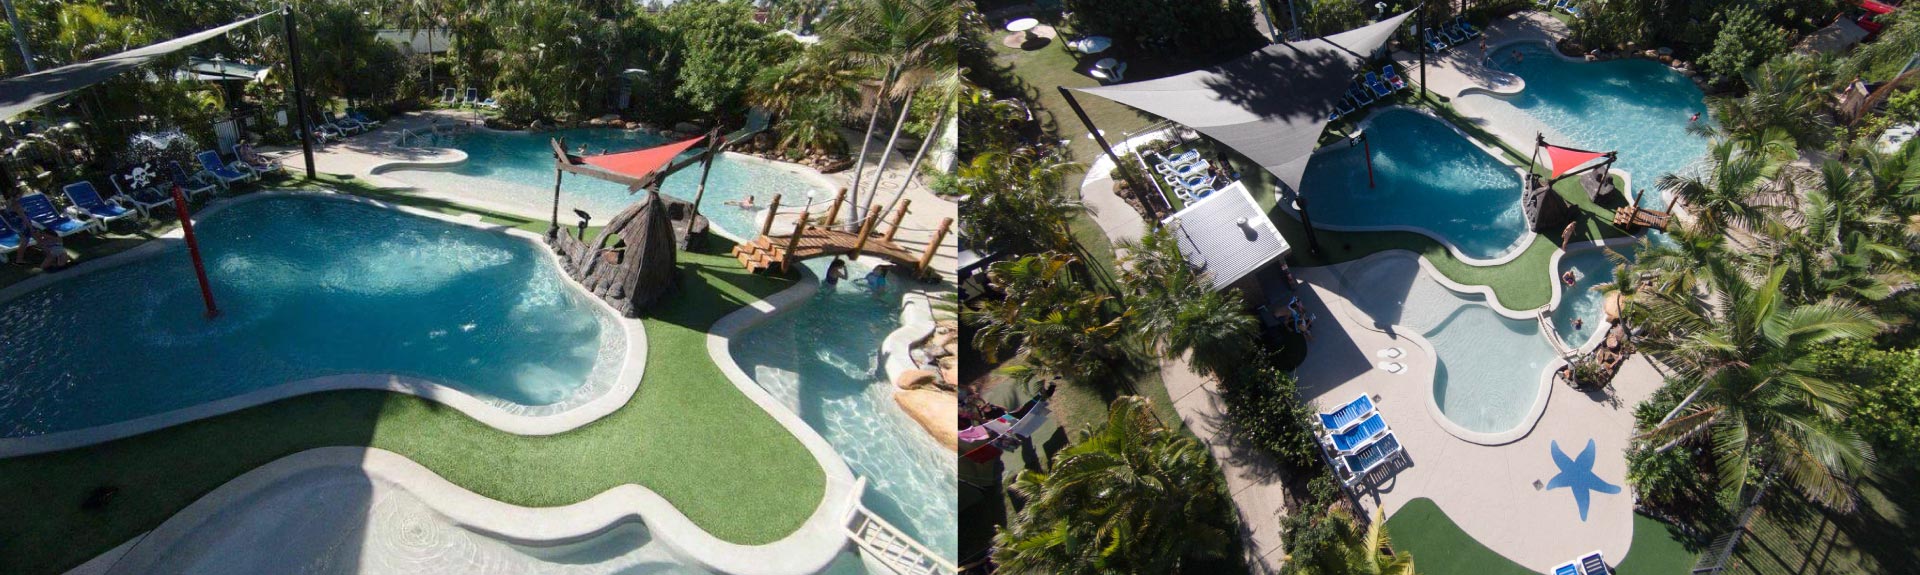 Brisbane, Gold Coast and Asia Pacific Pool Construction